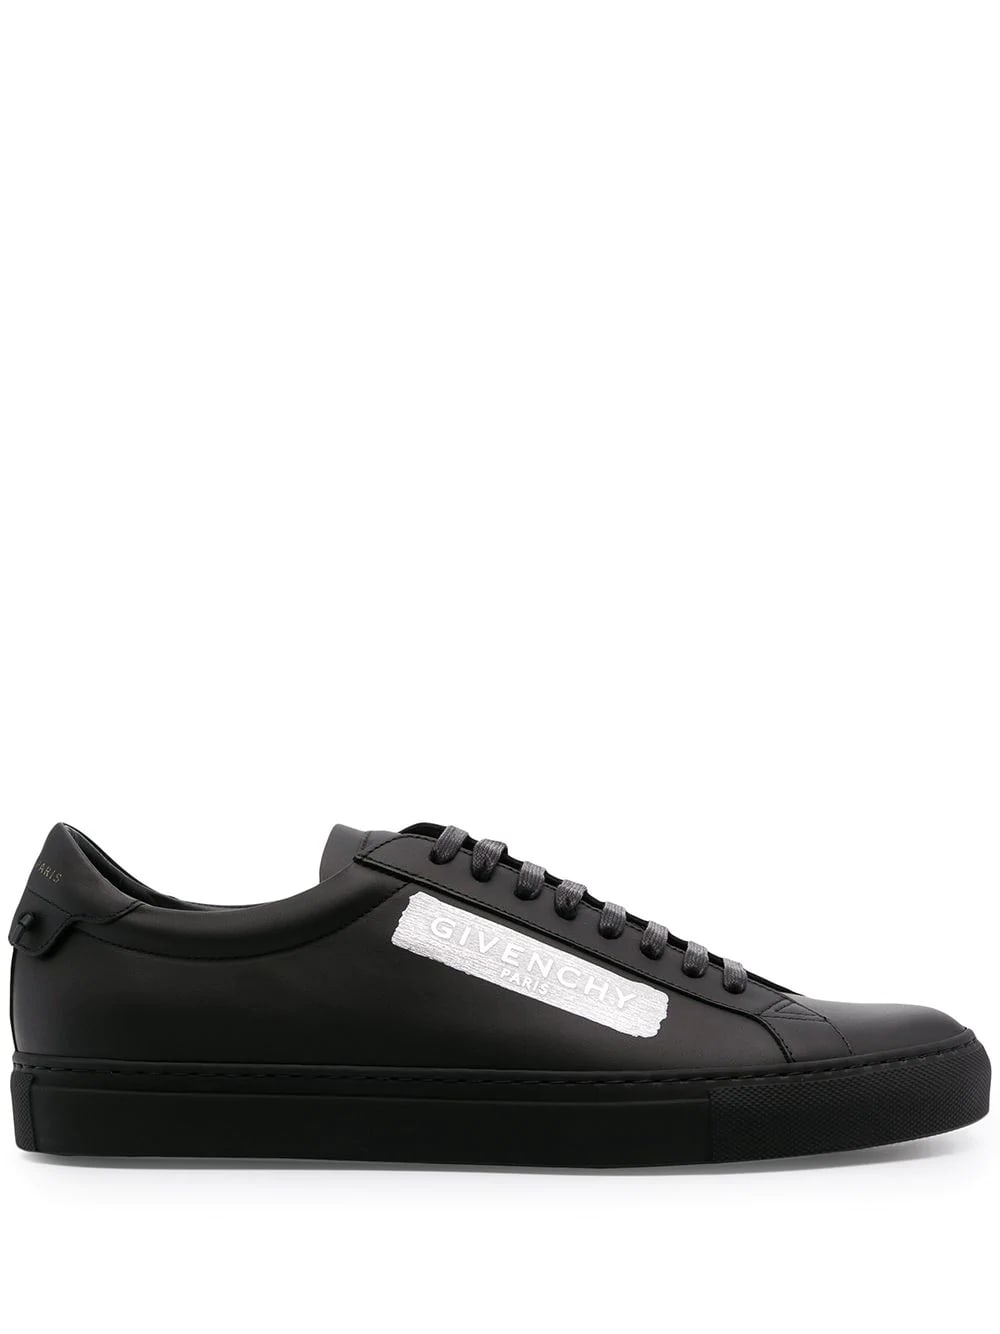 Givenchy Man Matte Black Urban Street Sneakers With Latex Stripe